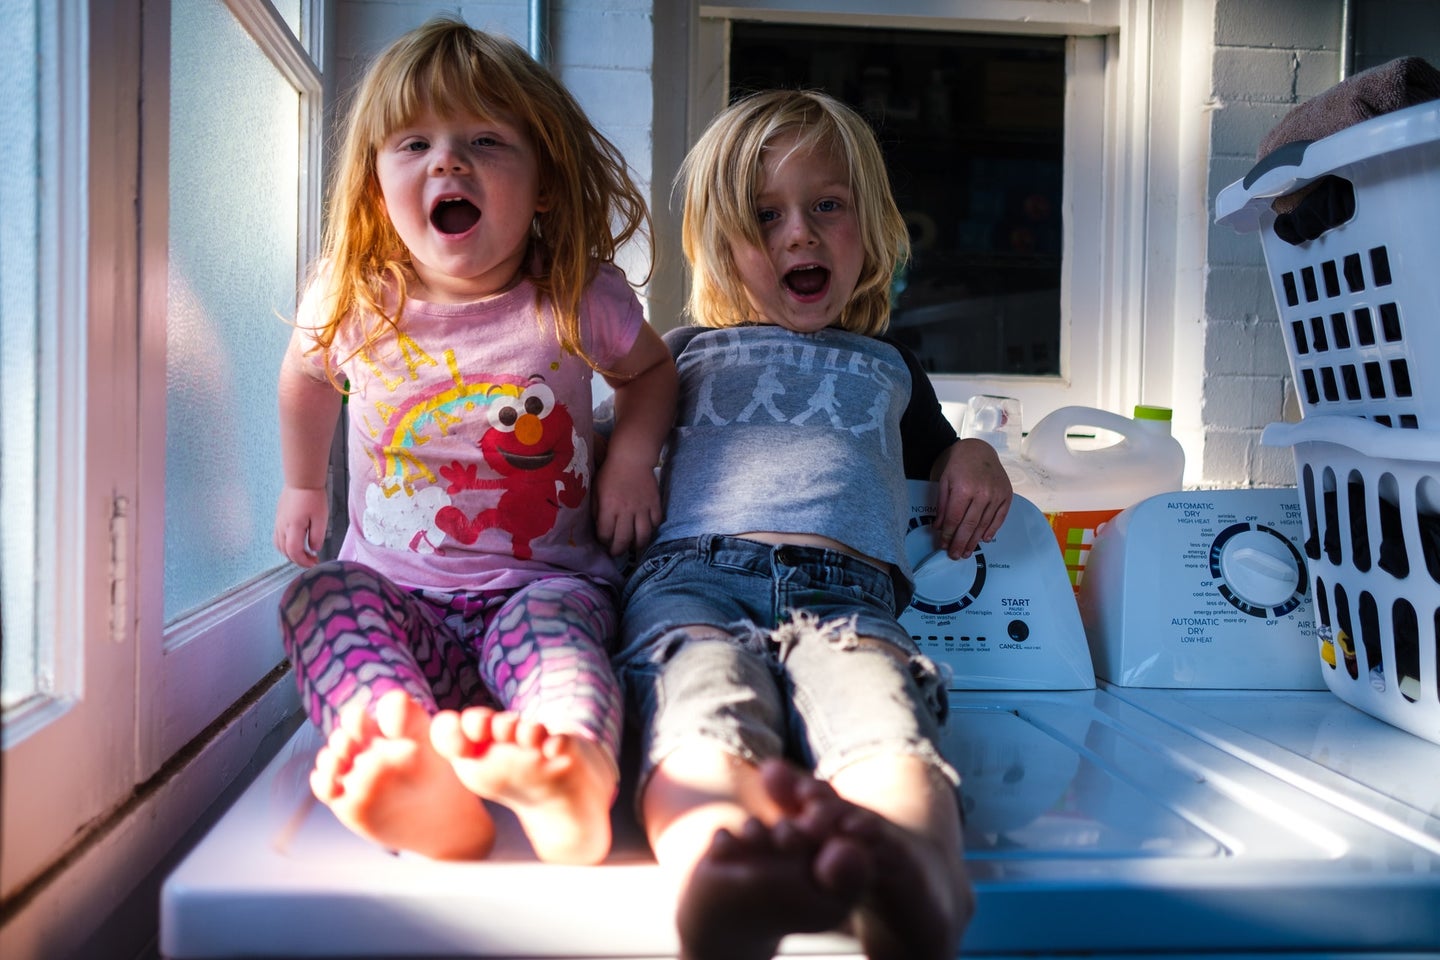 Two kids with blond and red hair sitting on a washer in a laundry room